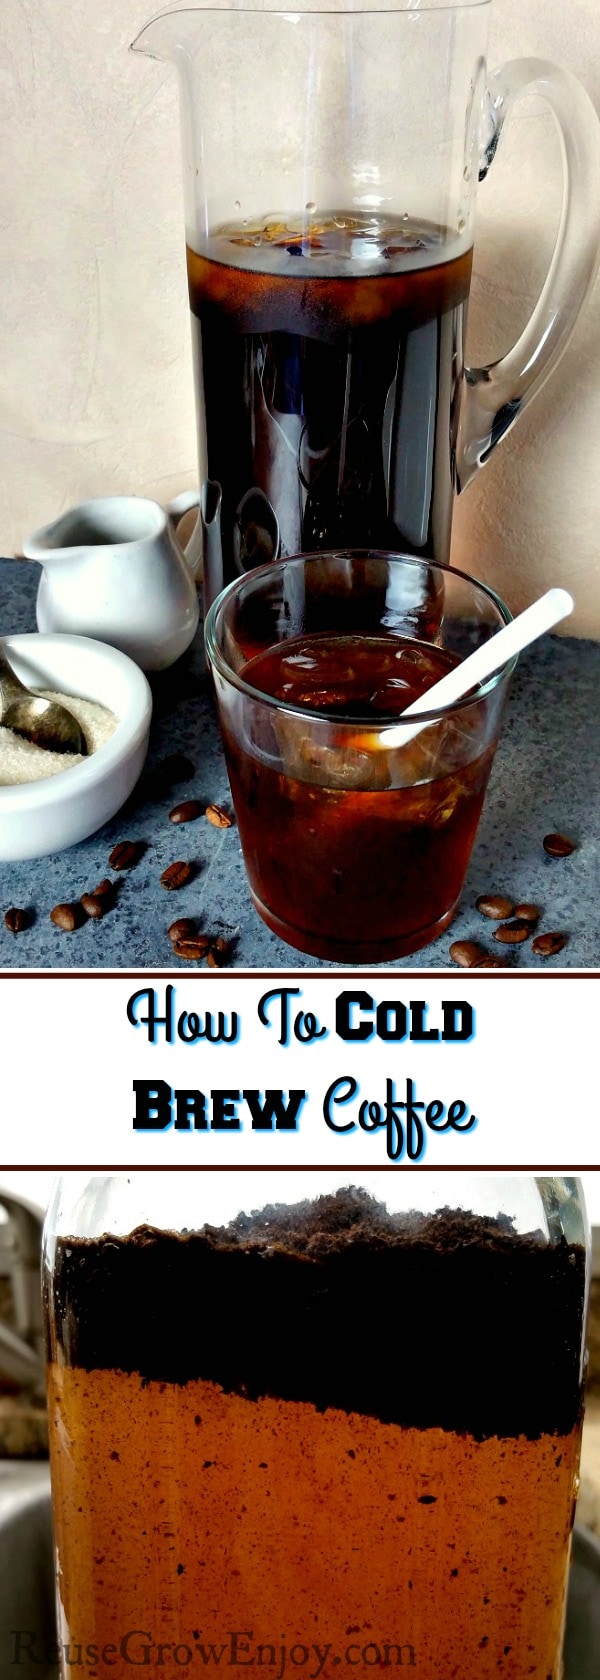 Sick of having bad tasting or watered down coffee? I will show you how to cold brew coffee so you have a great cup every time! So easy you can even do it when camping!